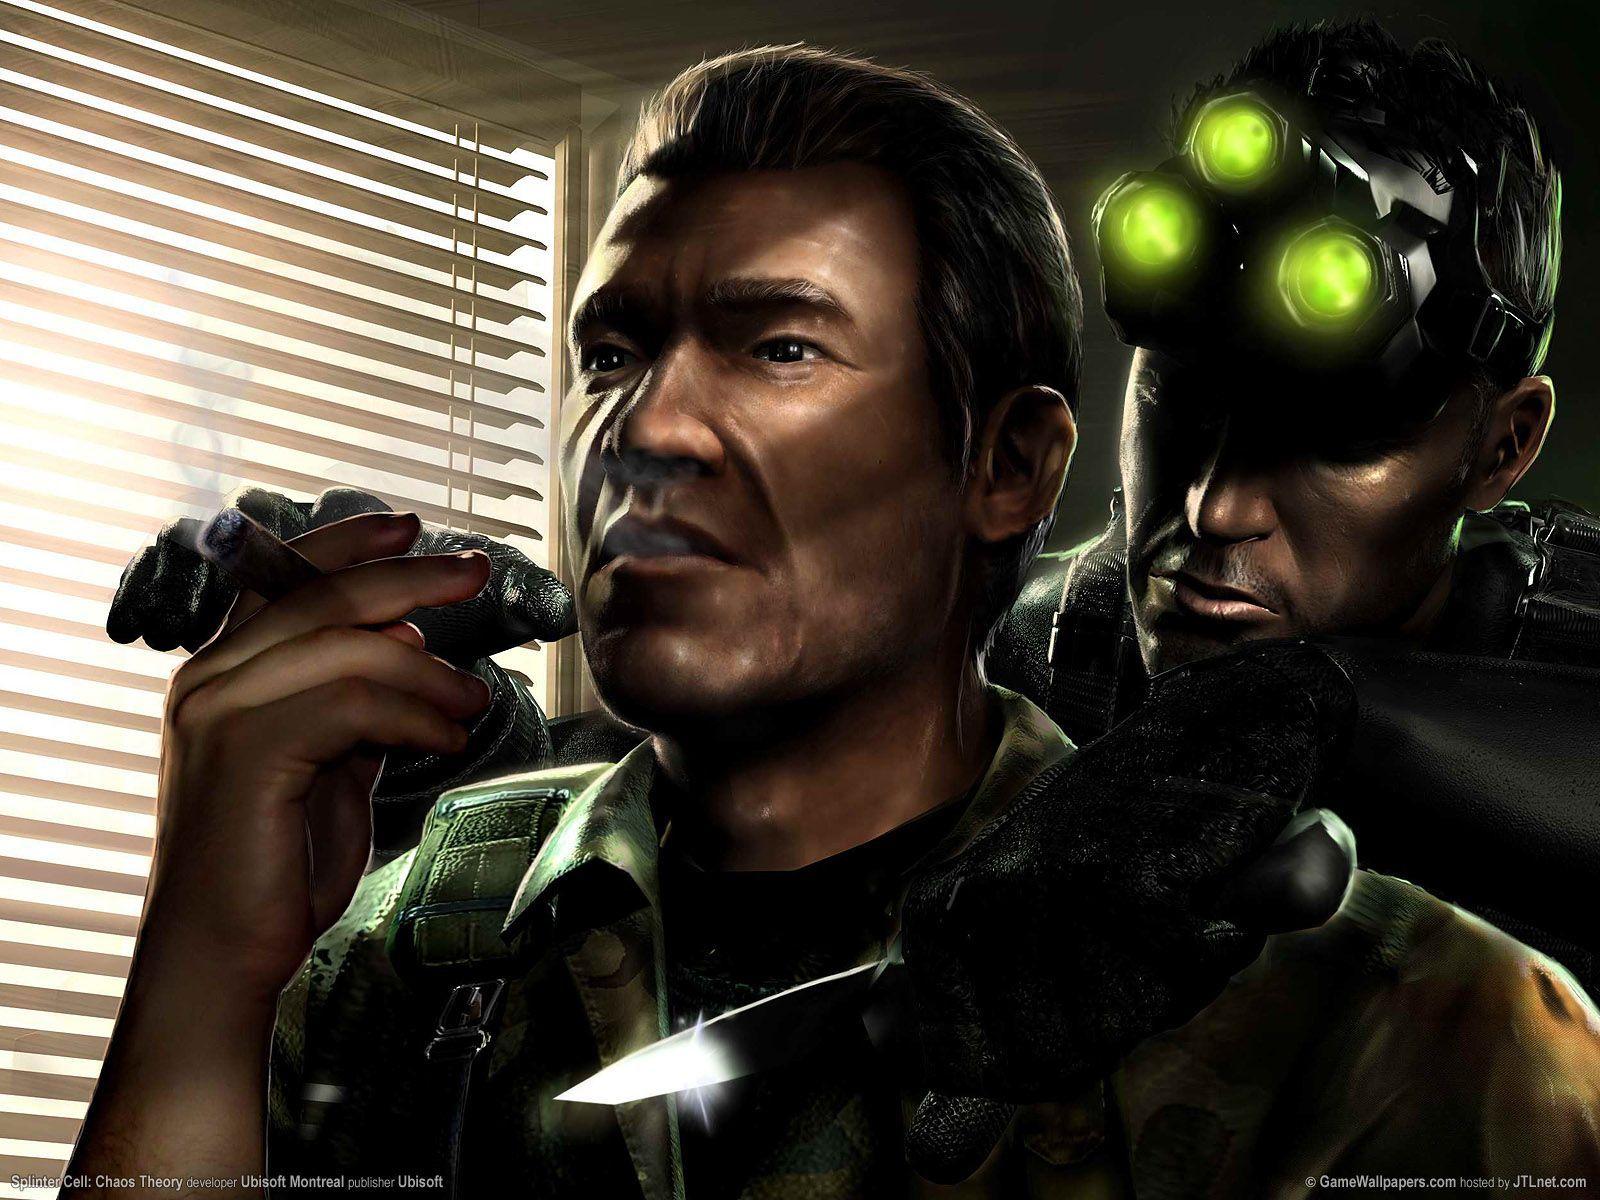 image For > Splinter Cell Chaos Theory Wallpaper